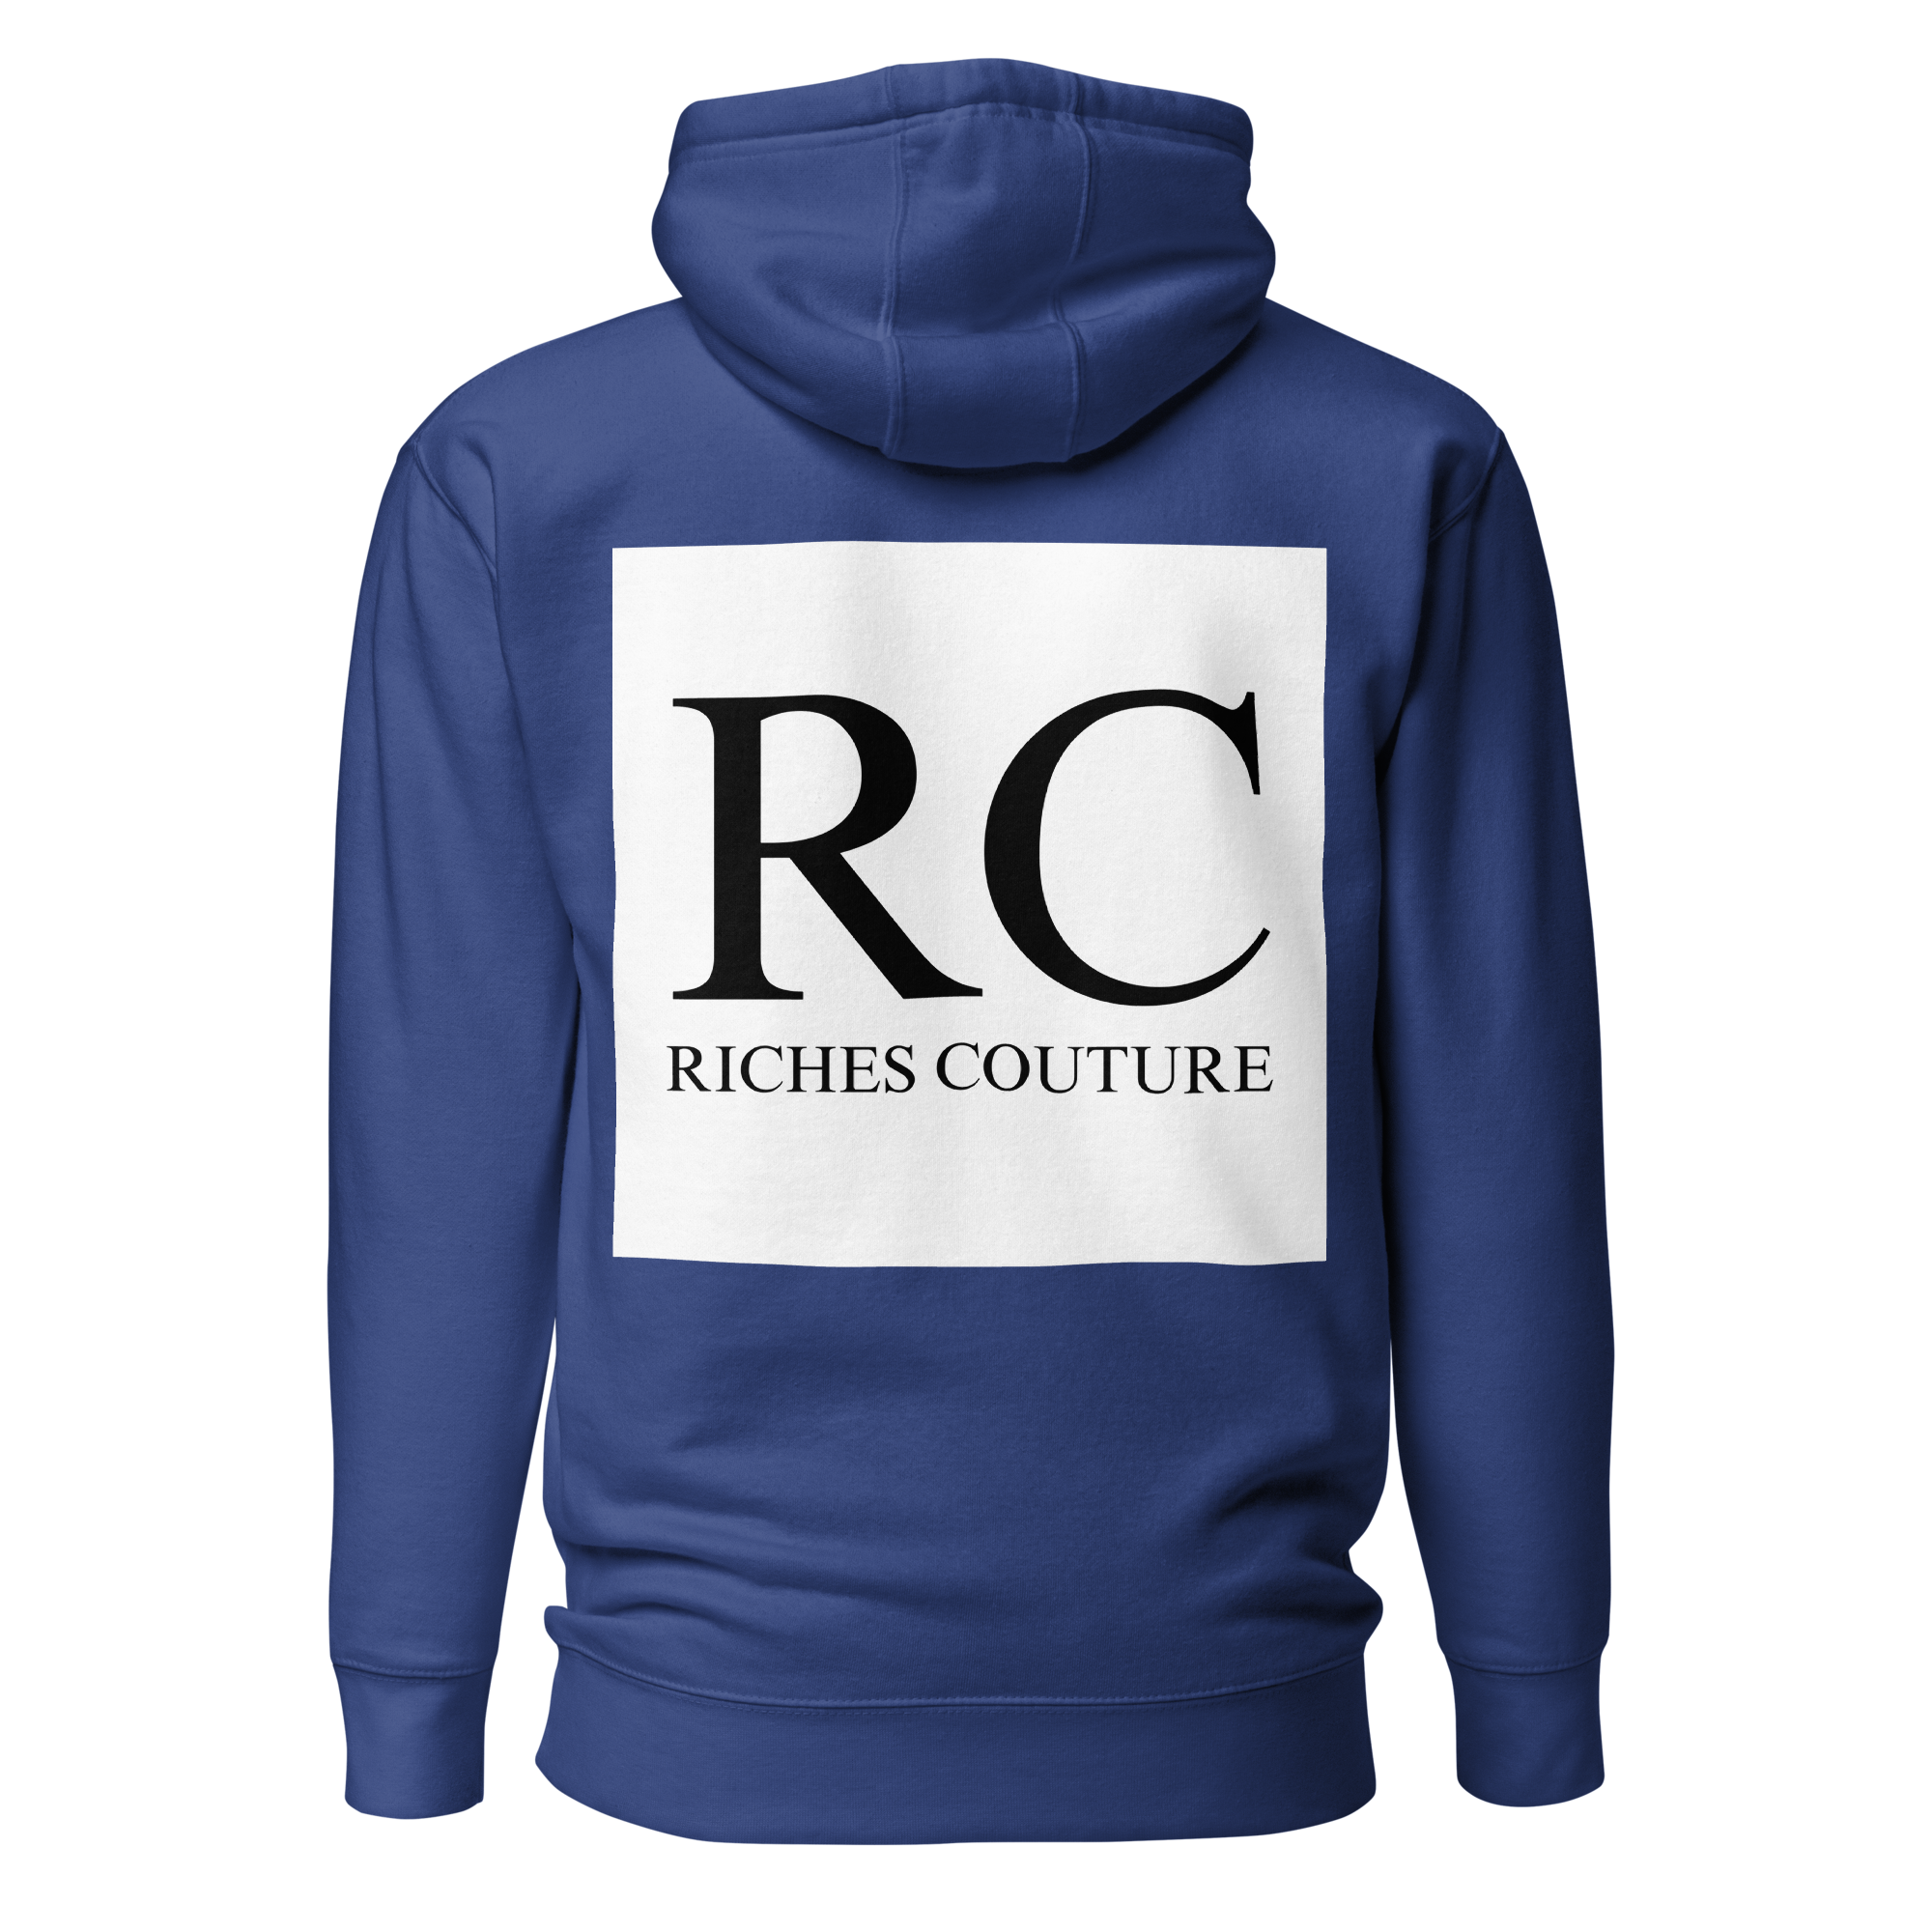 Riches Coutures Urban Comfort Men's Hoodie 